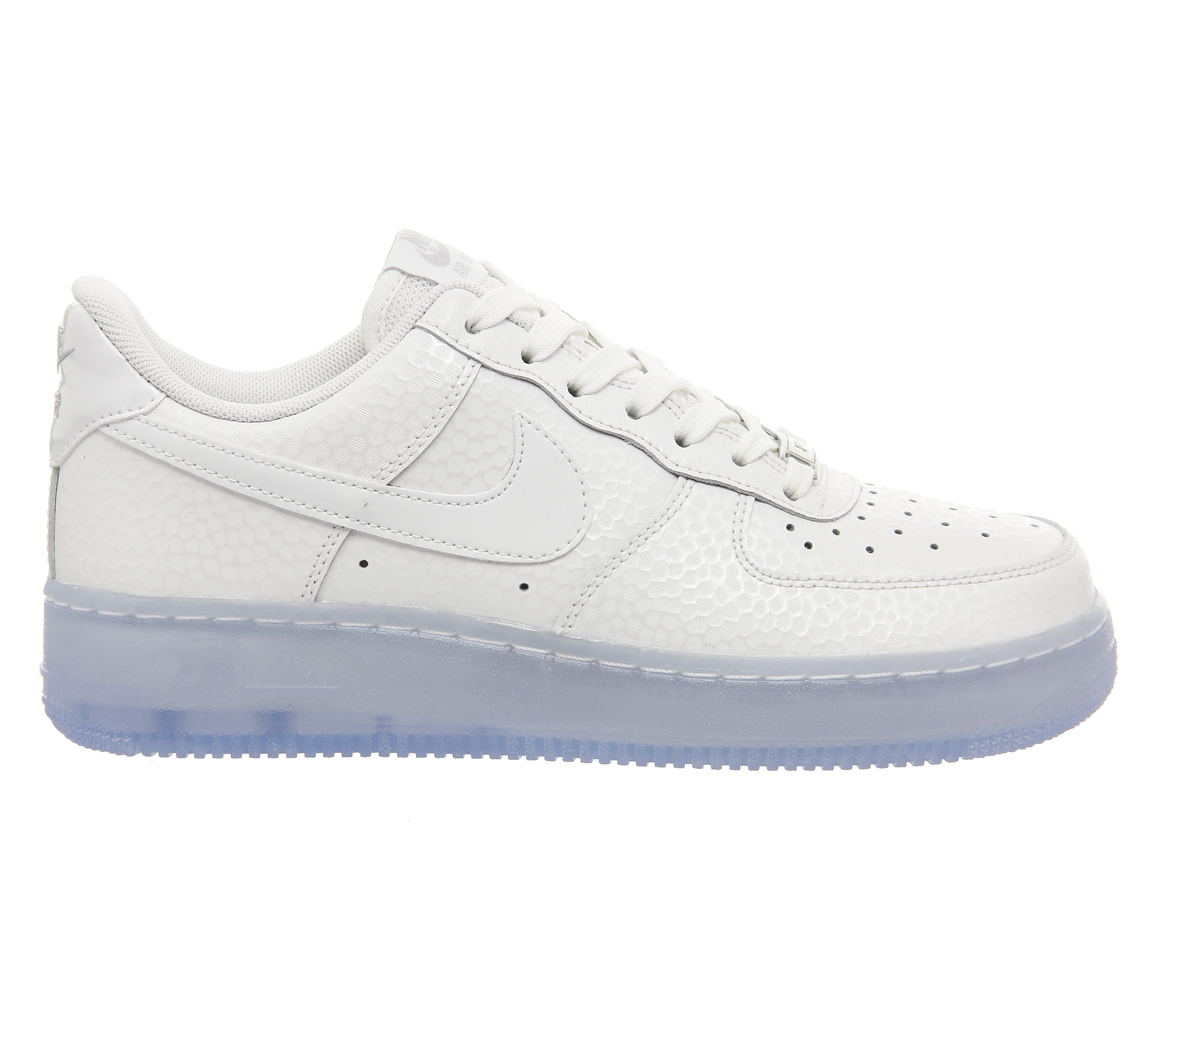 Nike Leather Air Force 1 '07 Prm Wmns in White - Lyst